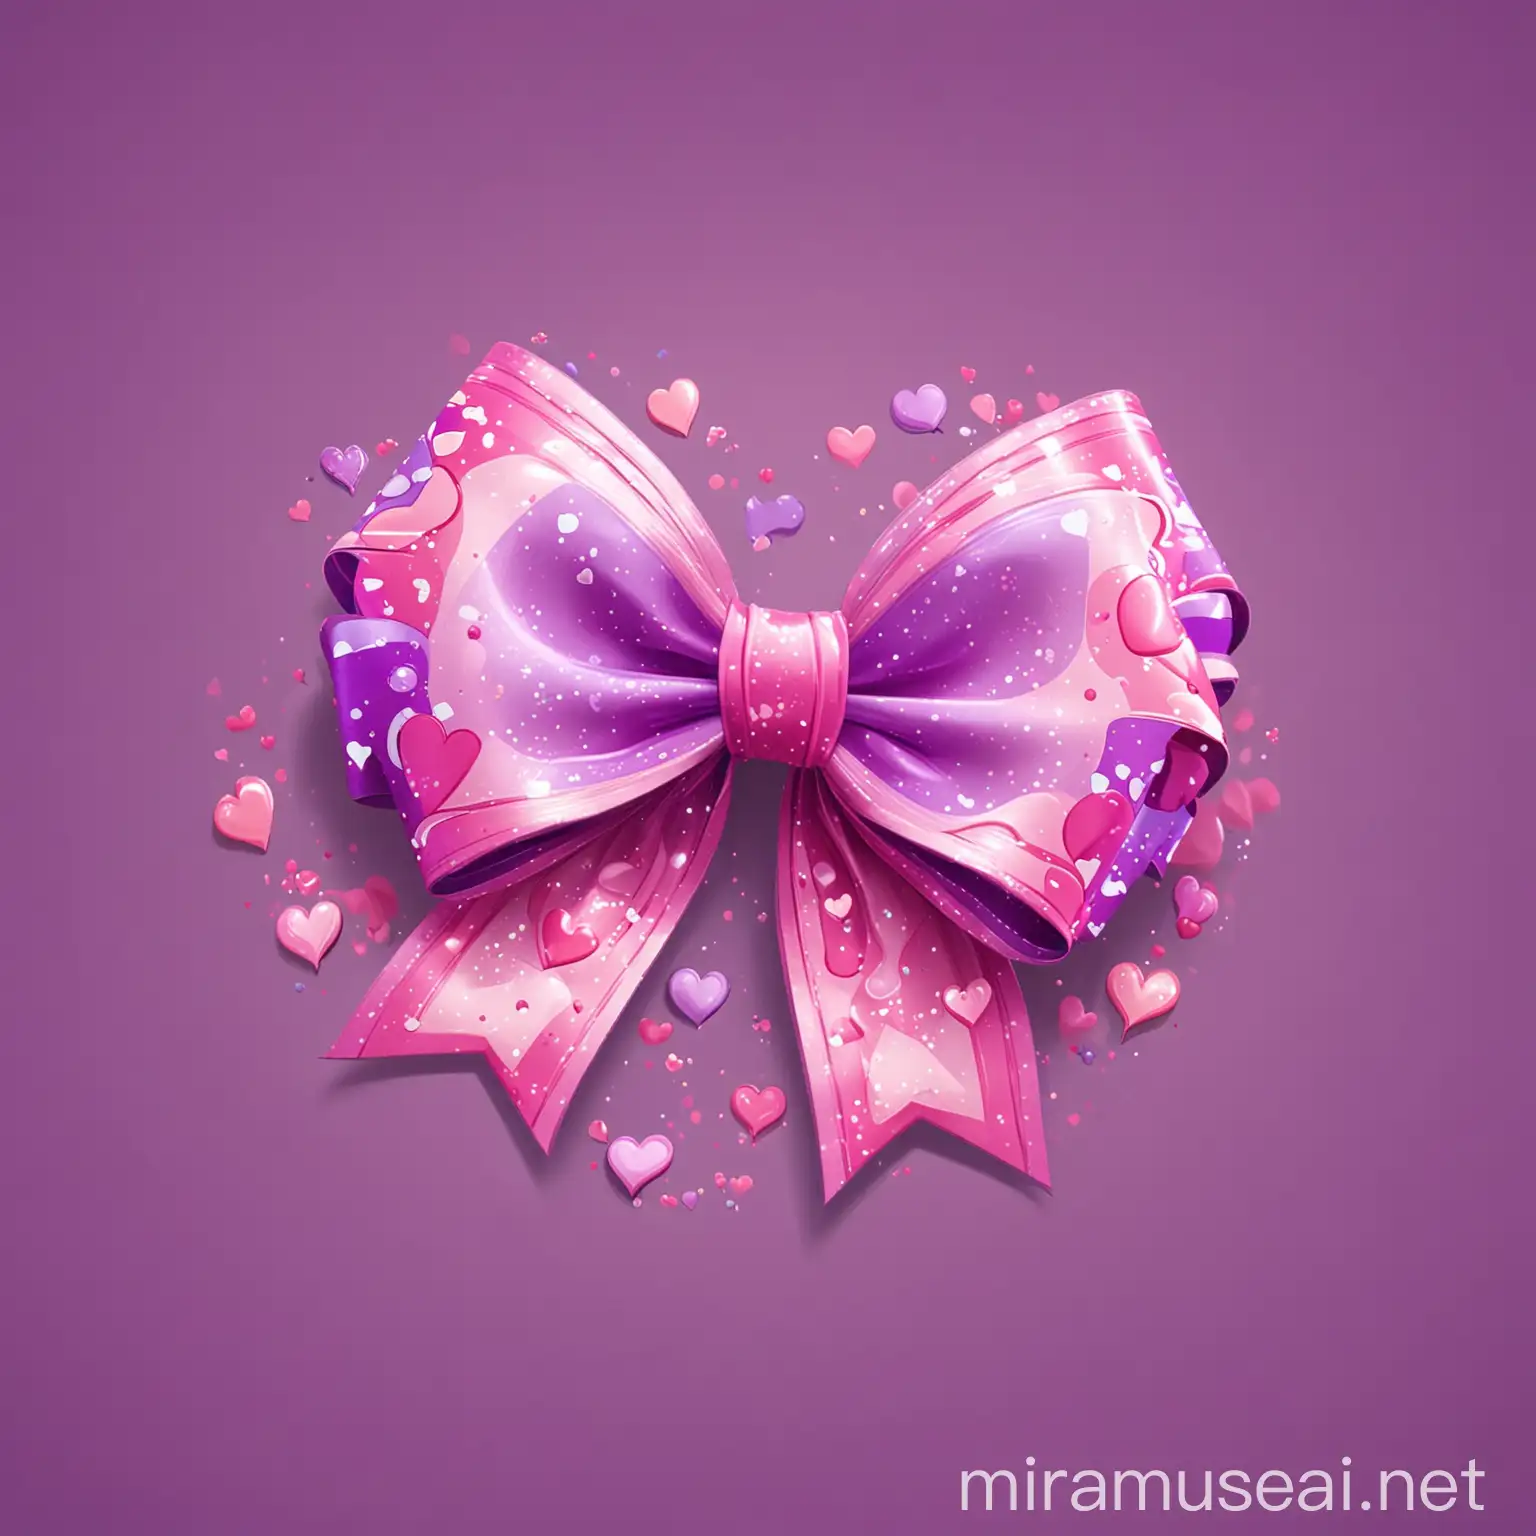 Fantasy Cartoon Bow Purple and Pink Love Bow with Hearts